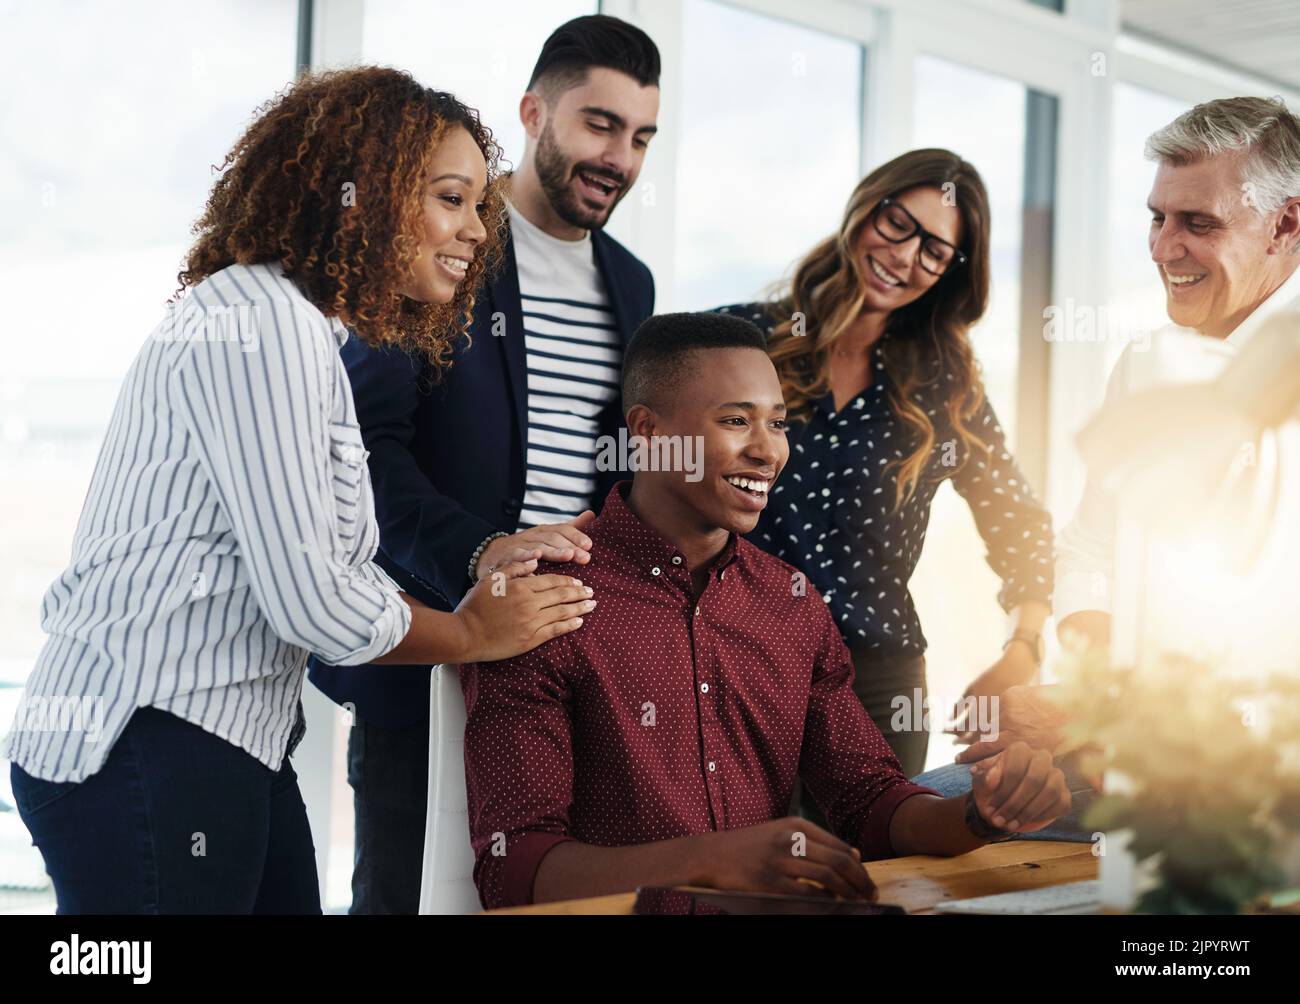 He made his team proud. a group of designers working together. Stock Photo